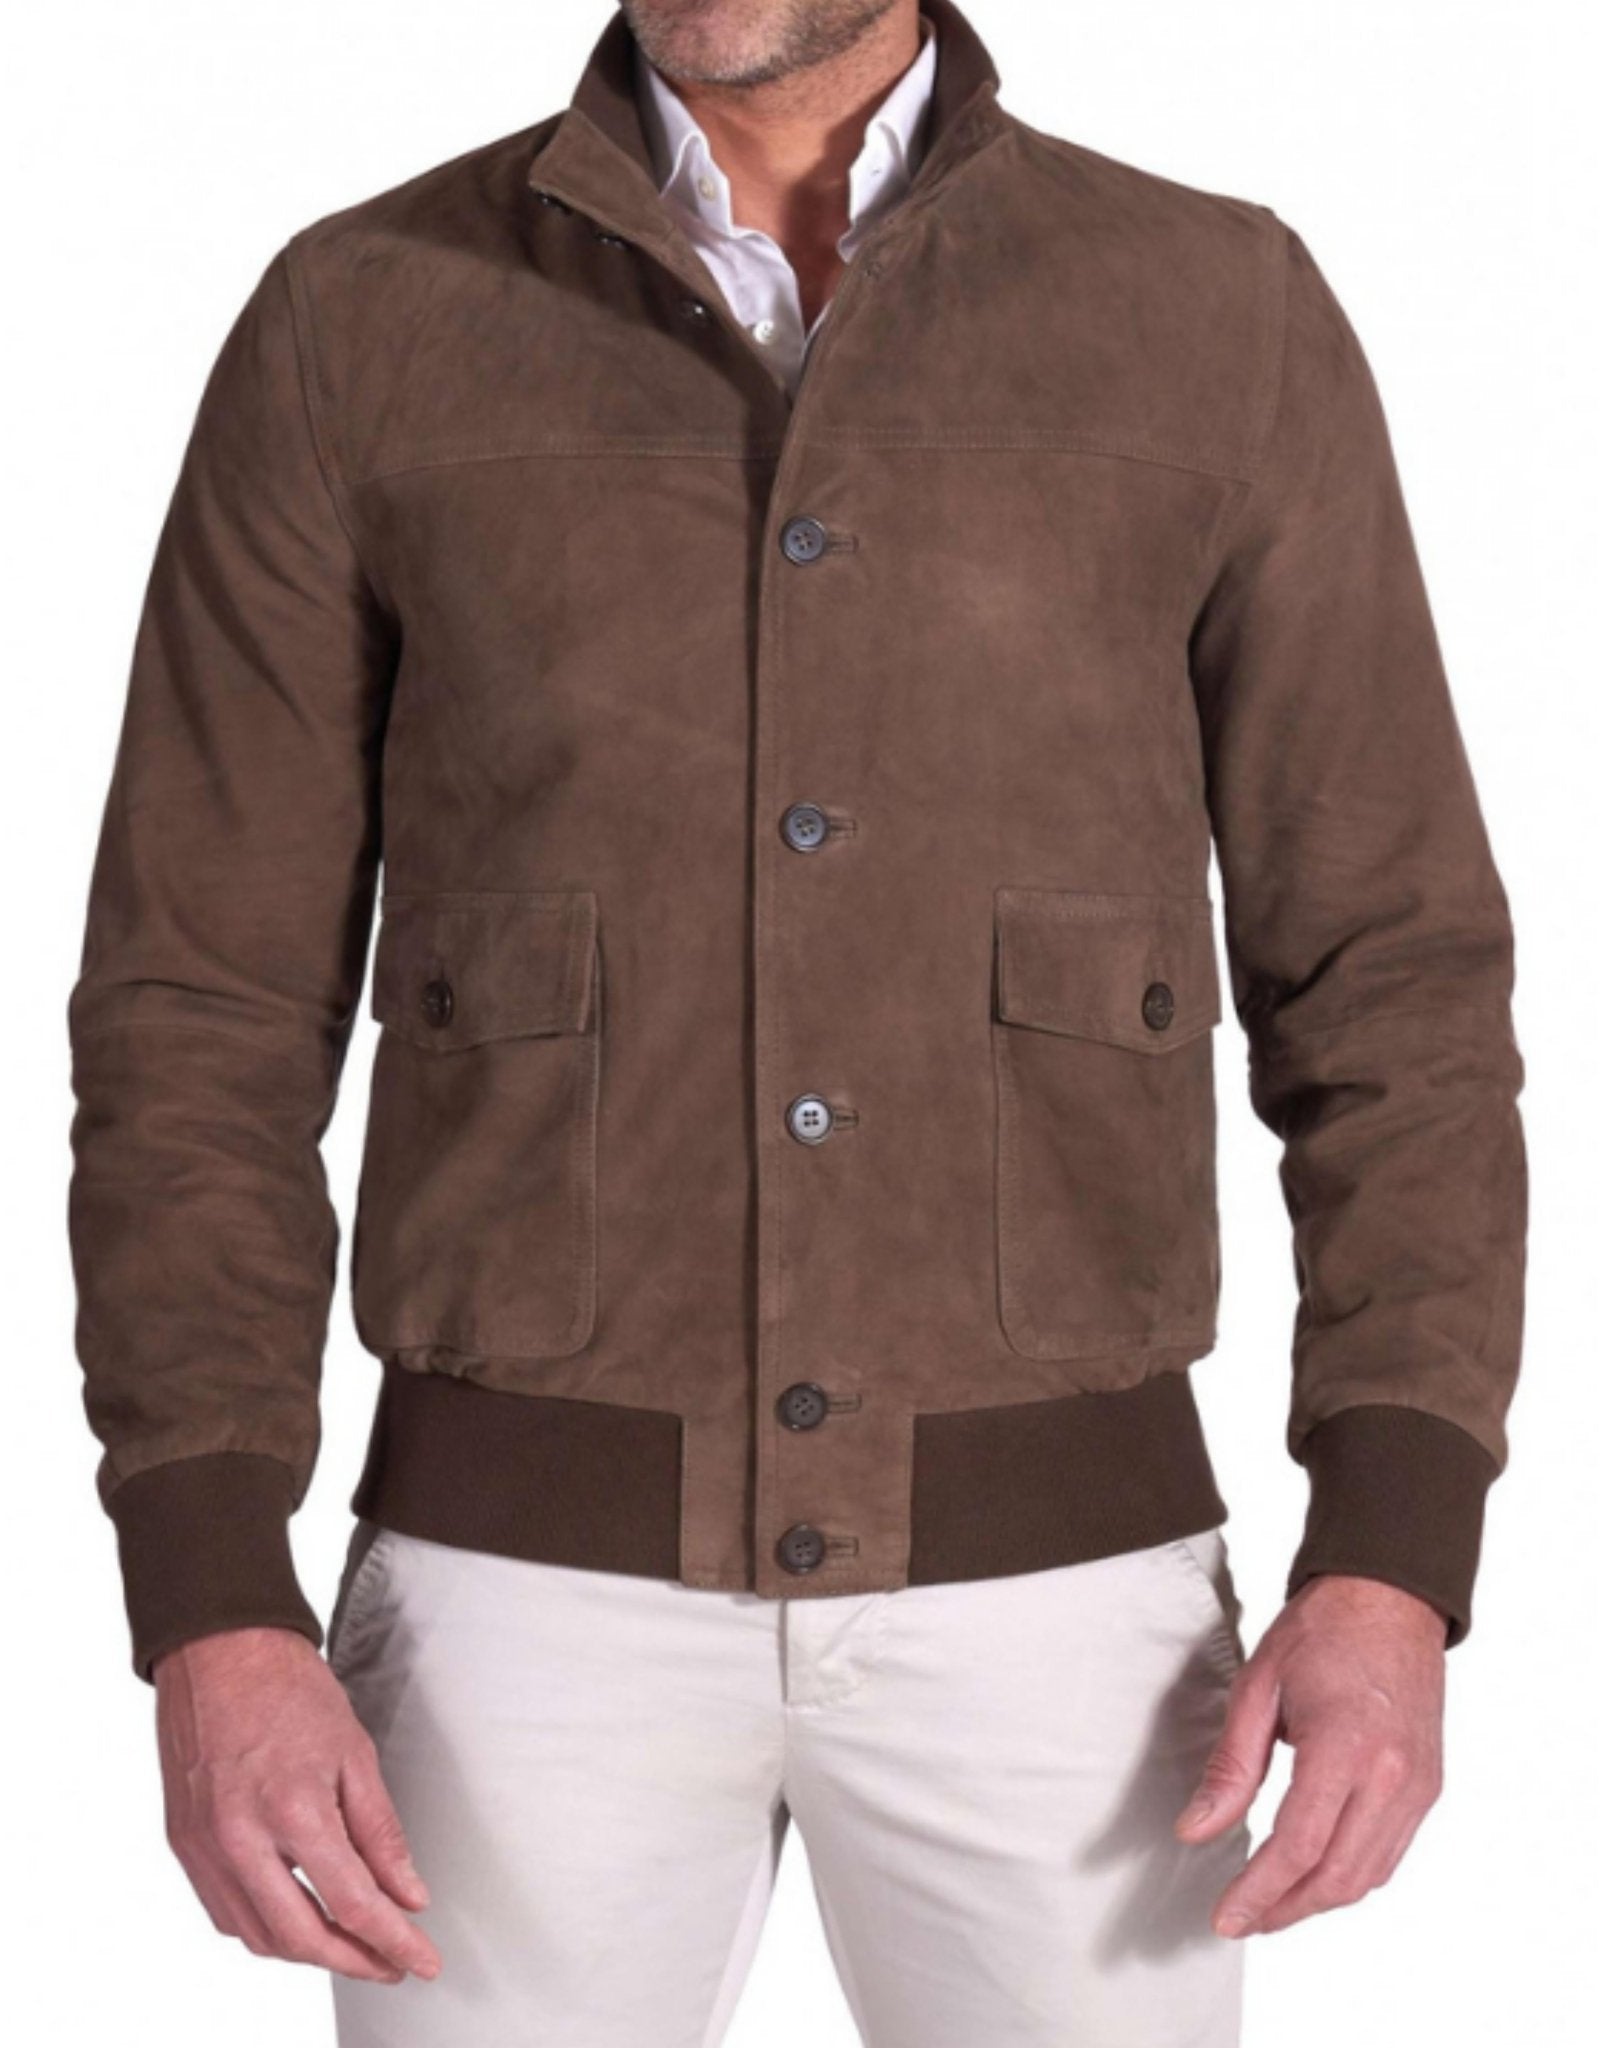 MCKINNON SUEDE LEATHER BUTTONED JACKET TAUPE - Henry BucksCasual Jackets38SS210003 - TAUP - R - 48